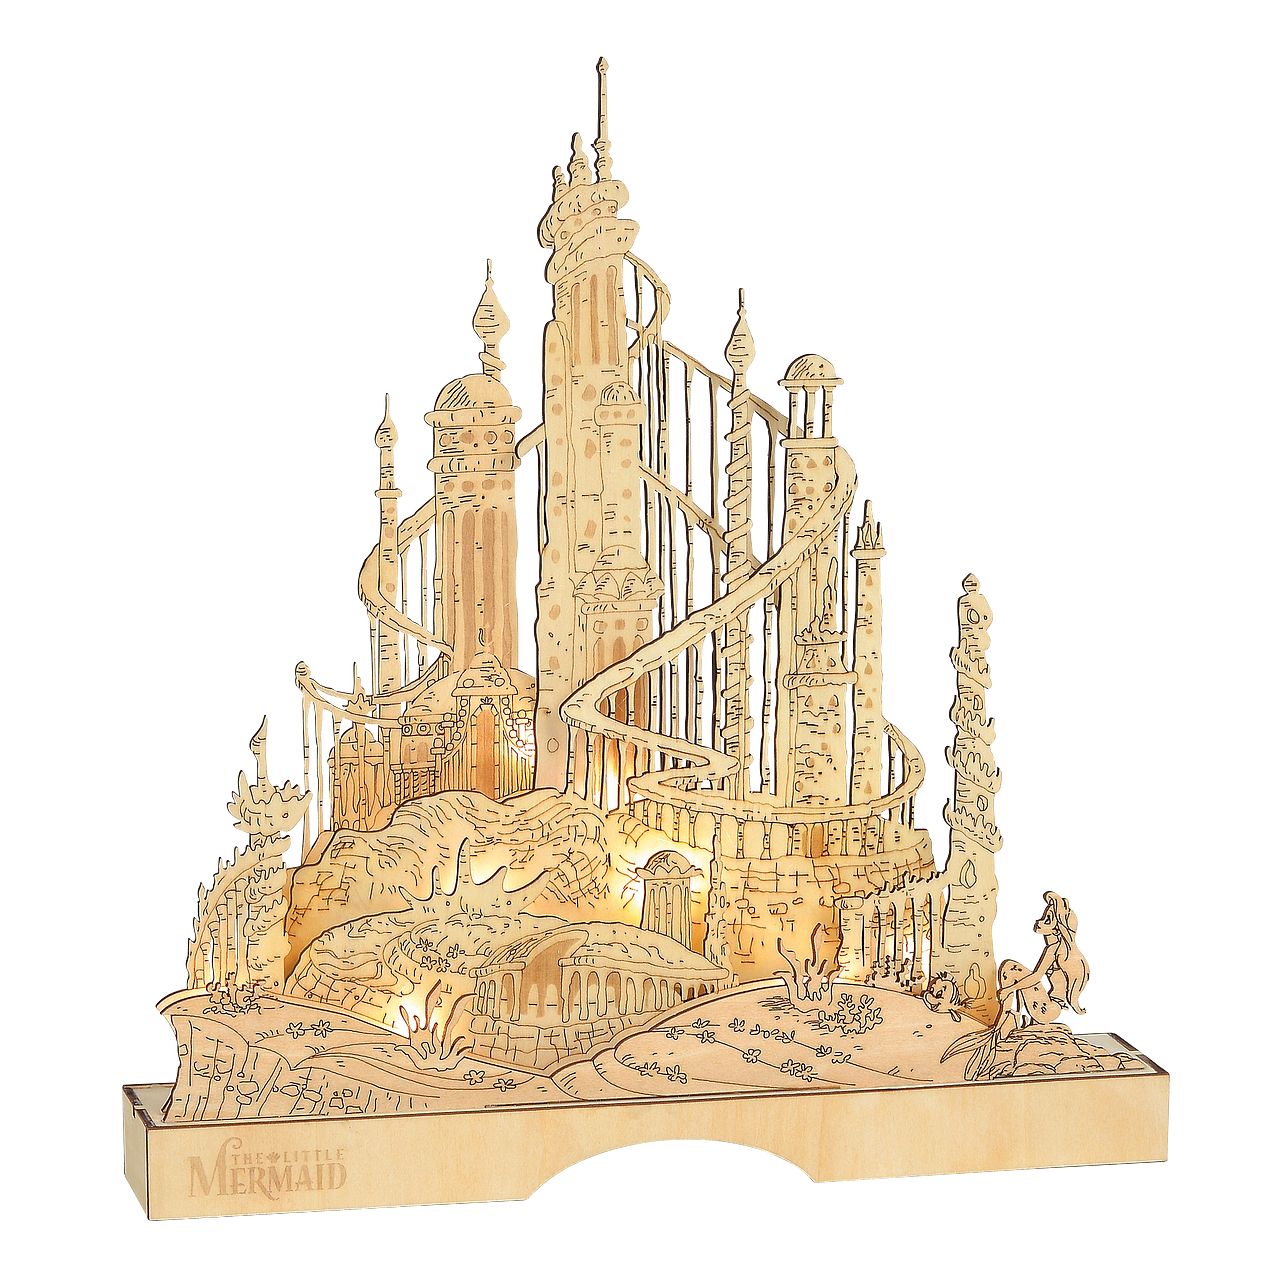 King Triton Illuminated Palace - The Little Mermaid  Ariel can be seen gazing up to her Father's Palace as it lights up the Atlantica Kingdom. The natural elements of the Basswood are carefully crafted and layered to build a multidimensional King Trition's Palace. 